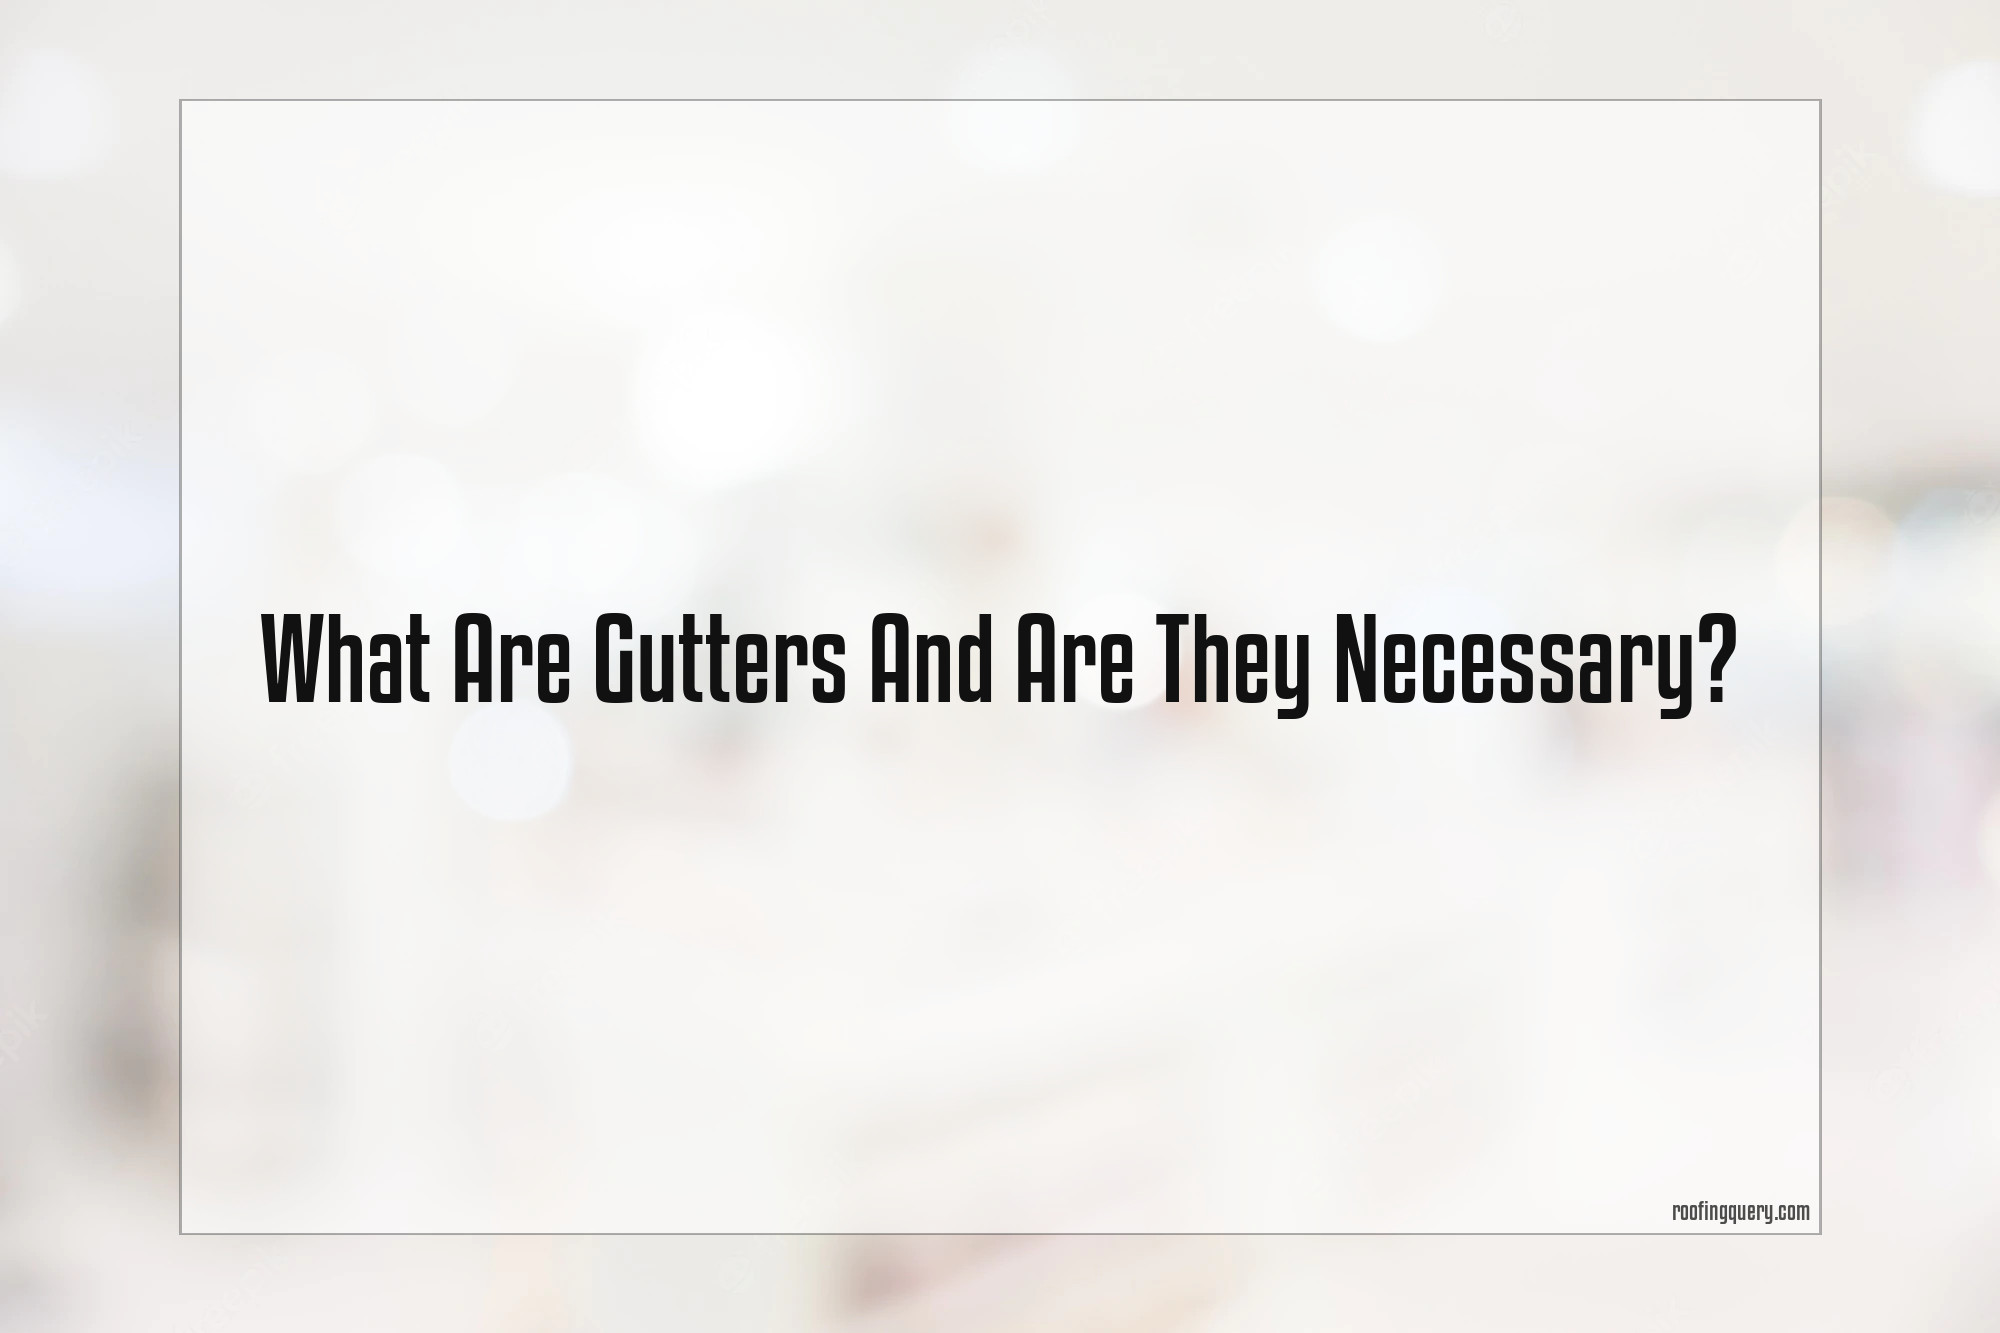 What Are Gutters And Are They Necessary